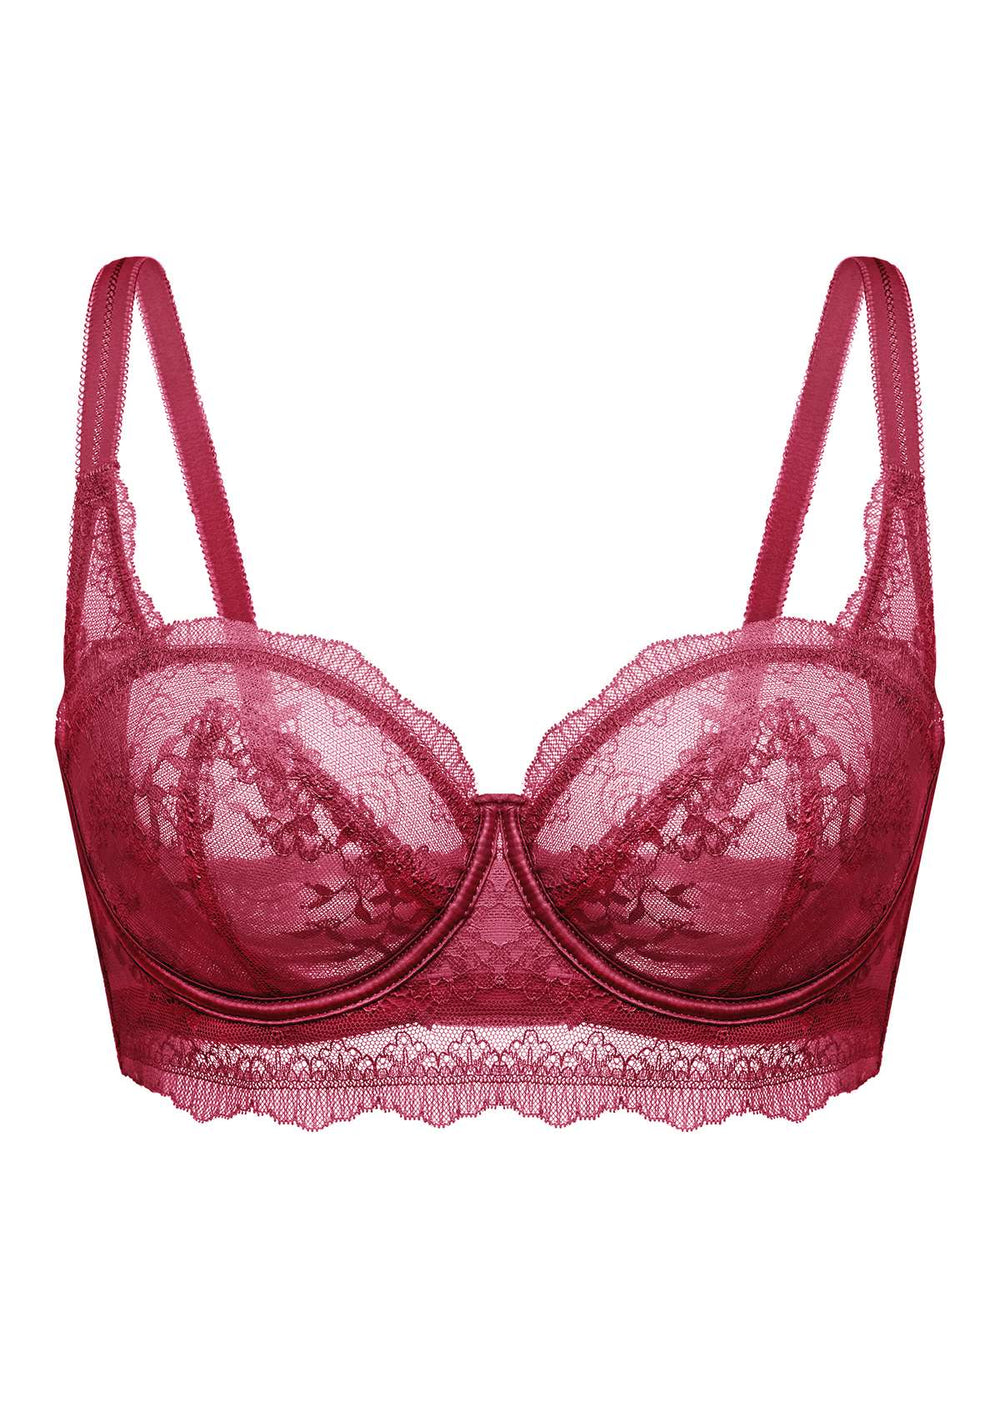 Padded bra with fine cups and floral lace - red - Undiz